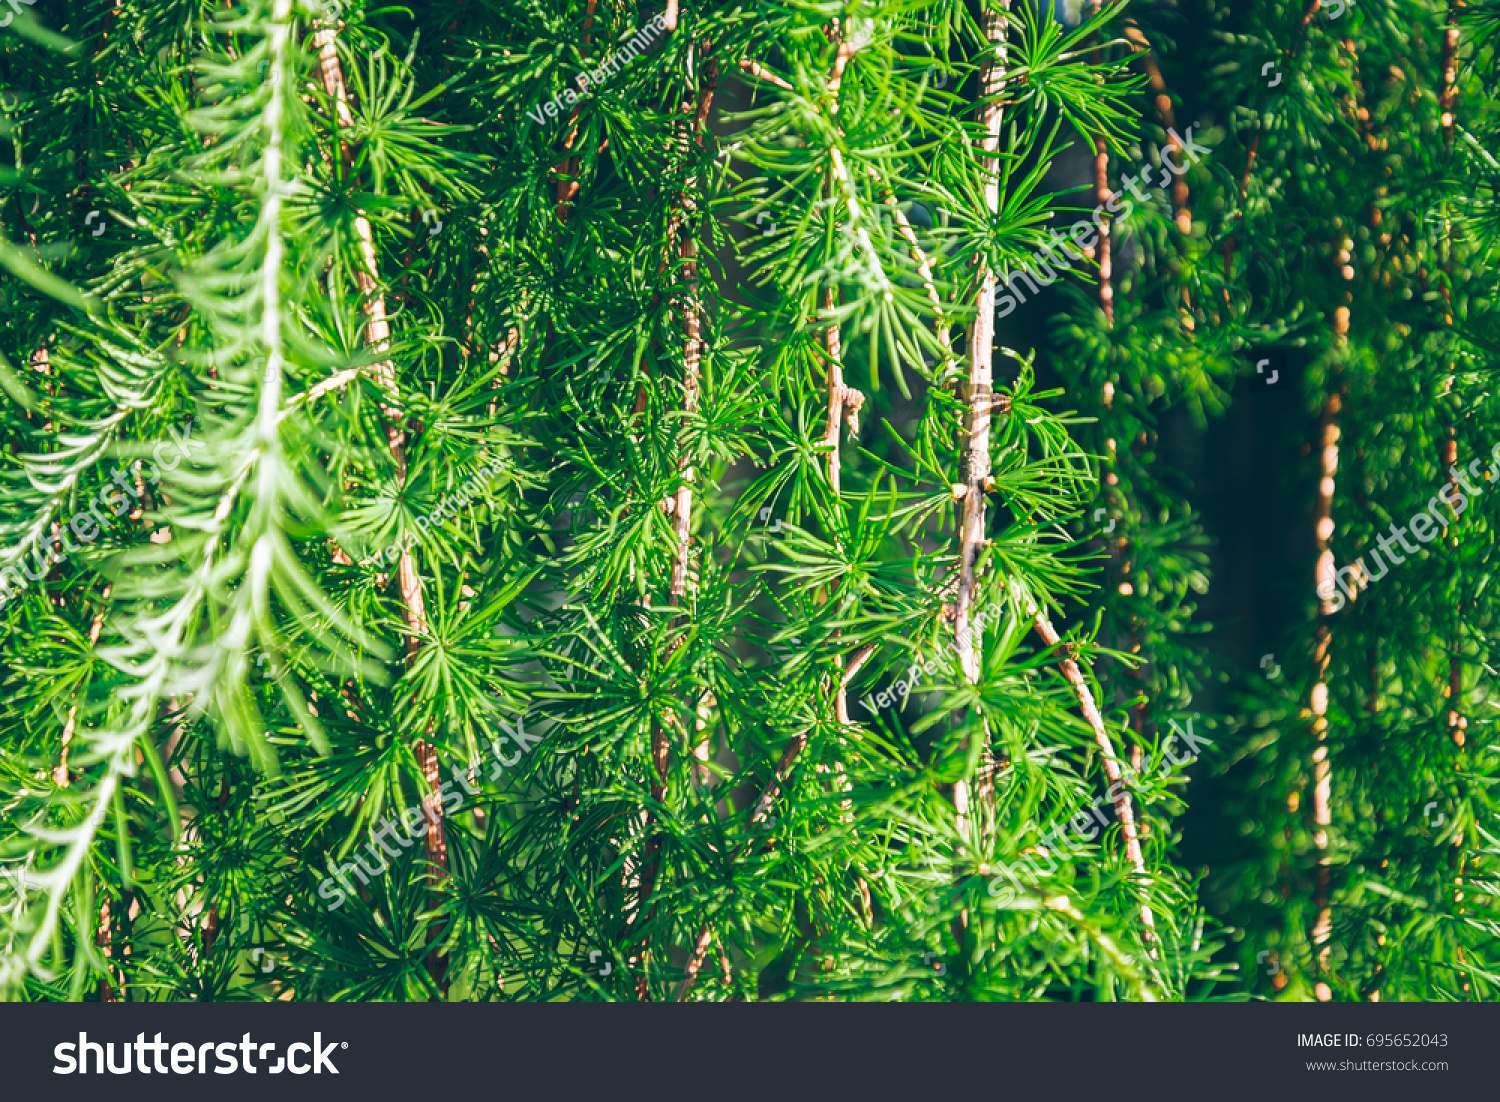 branches of needles tree close up, background concept #695652043